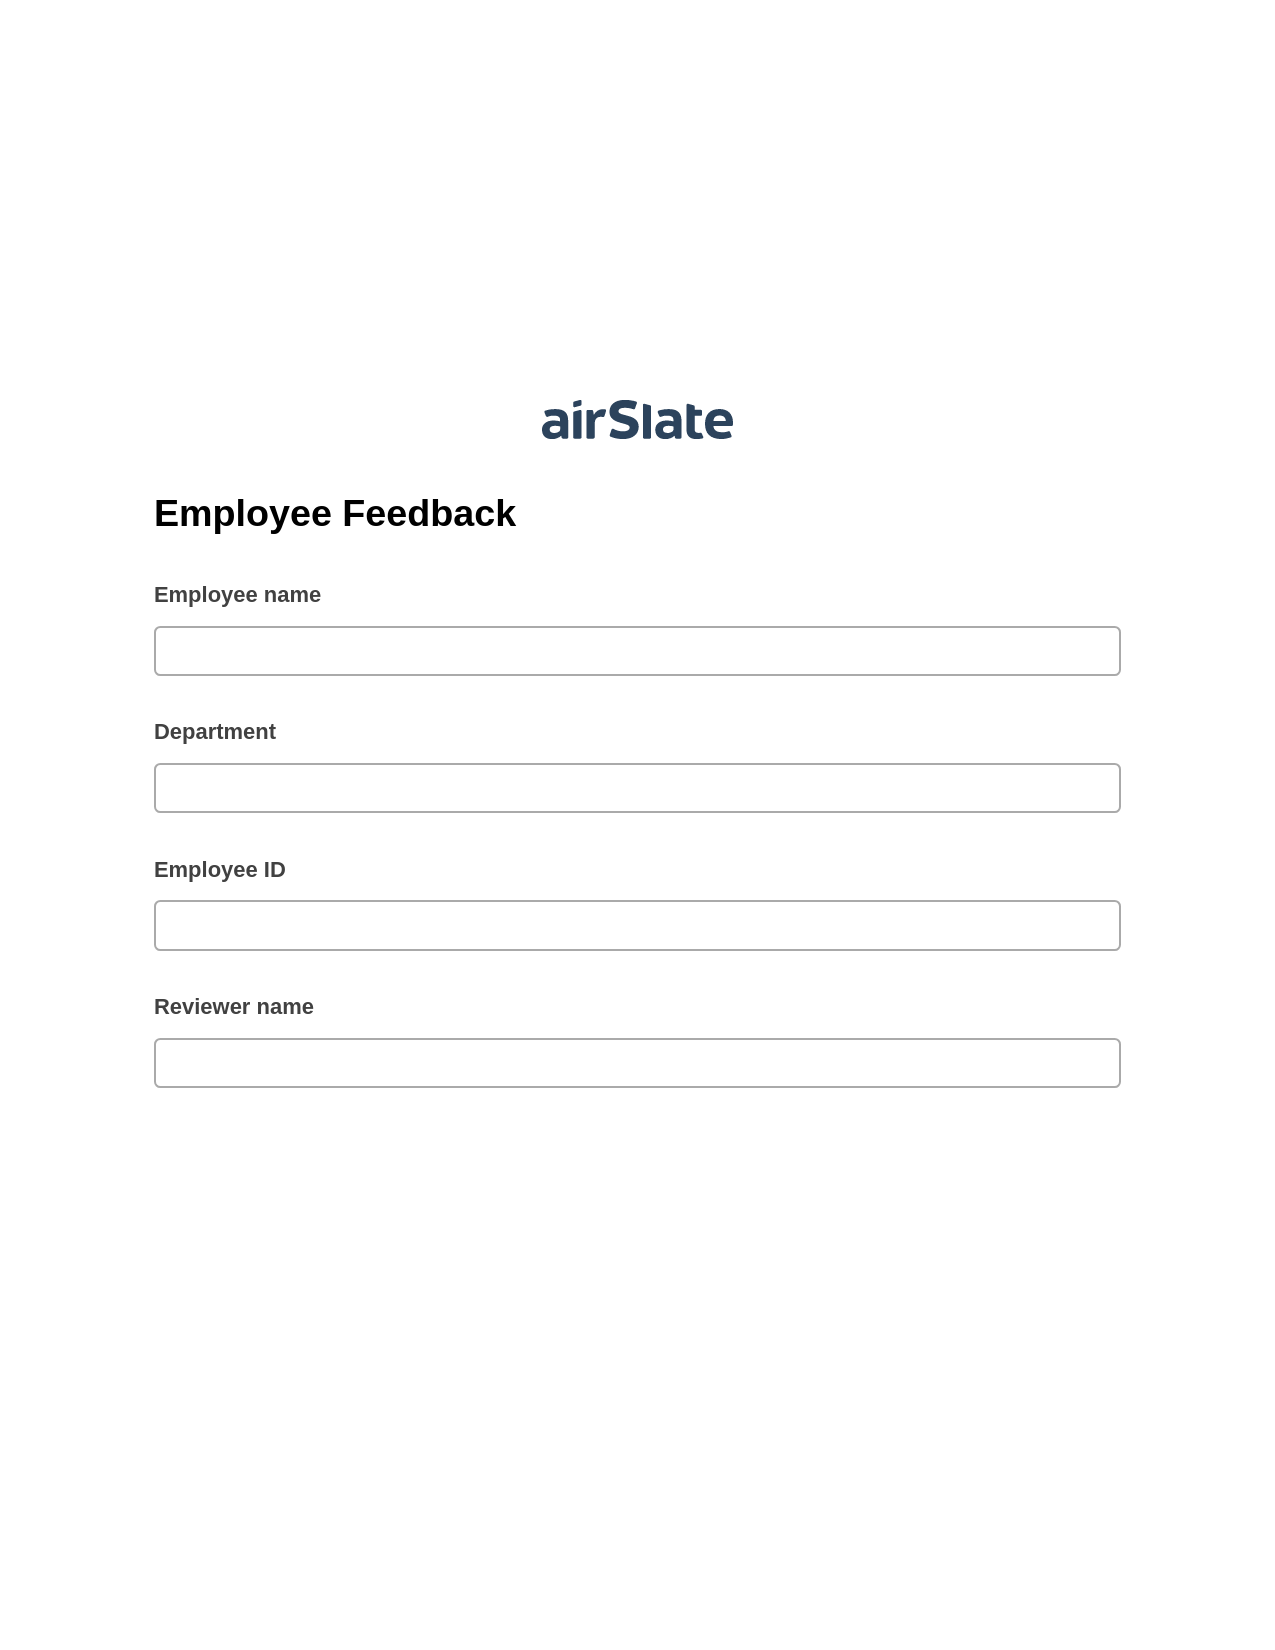 Employee Feedback Pre-fill from Google Sheet Dropdown Options Bot, Assign Roles to Recipients Bot, Post-finish Document Bot